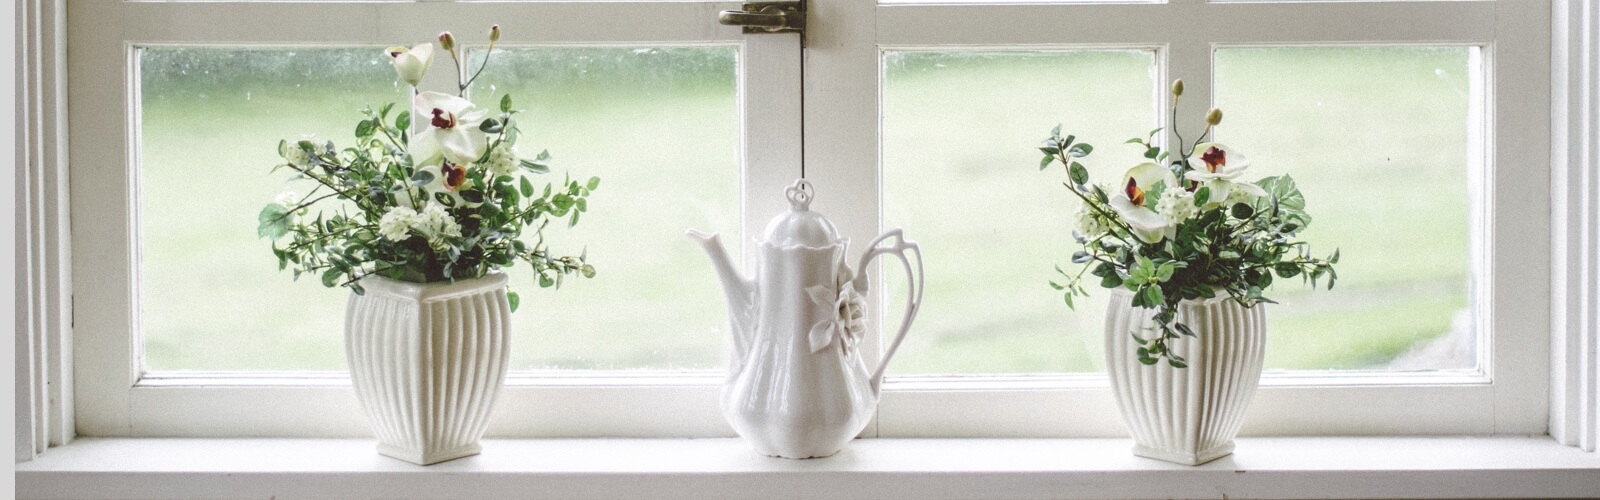 two flower pots and a kettle in front of a window